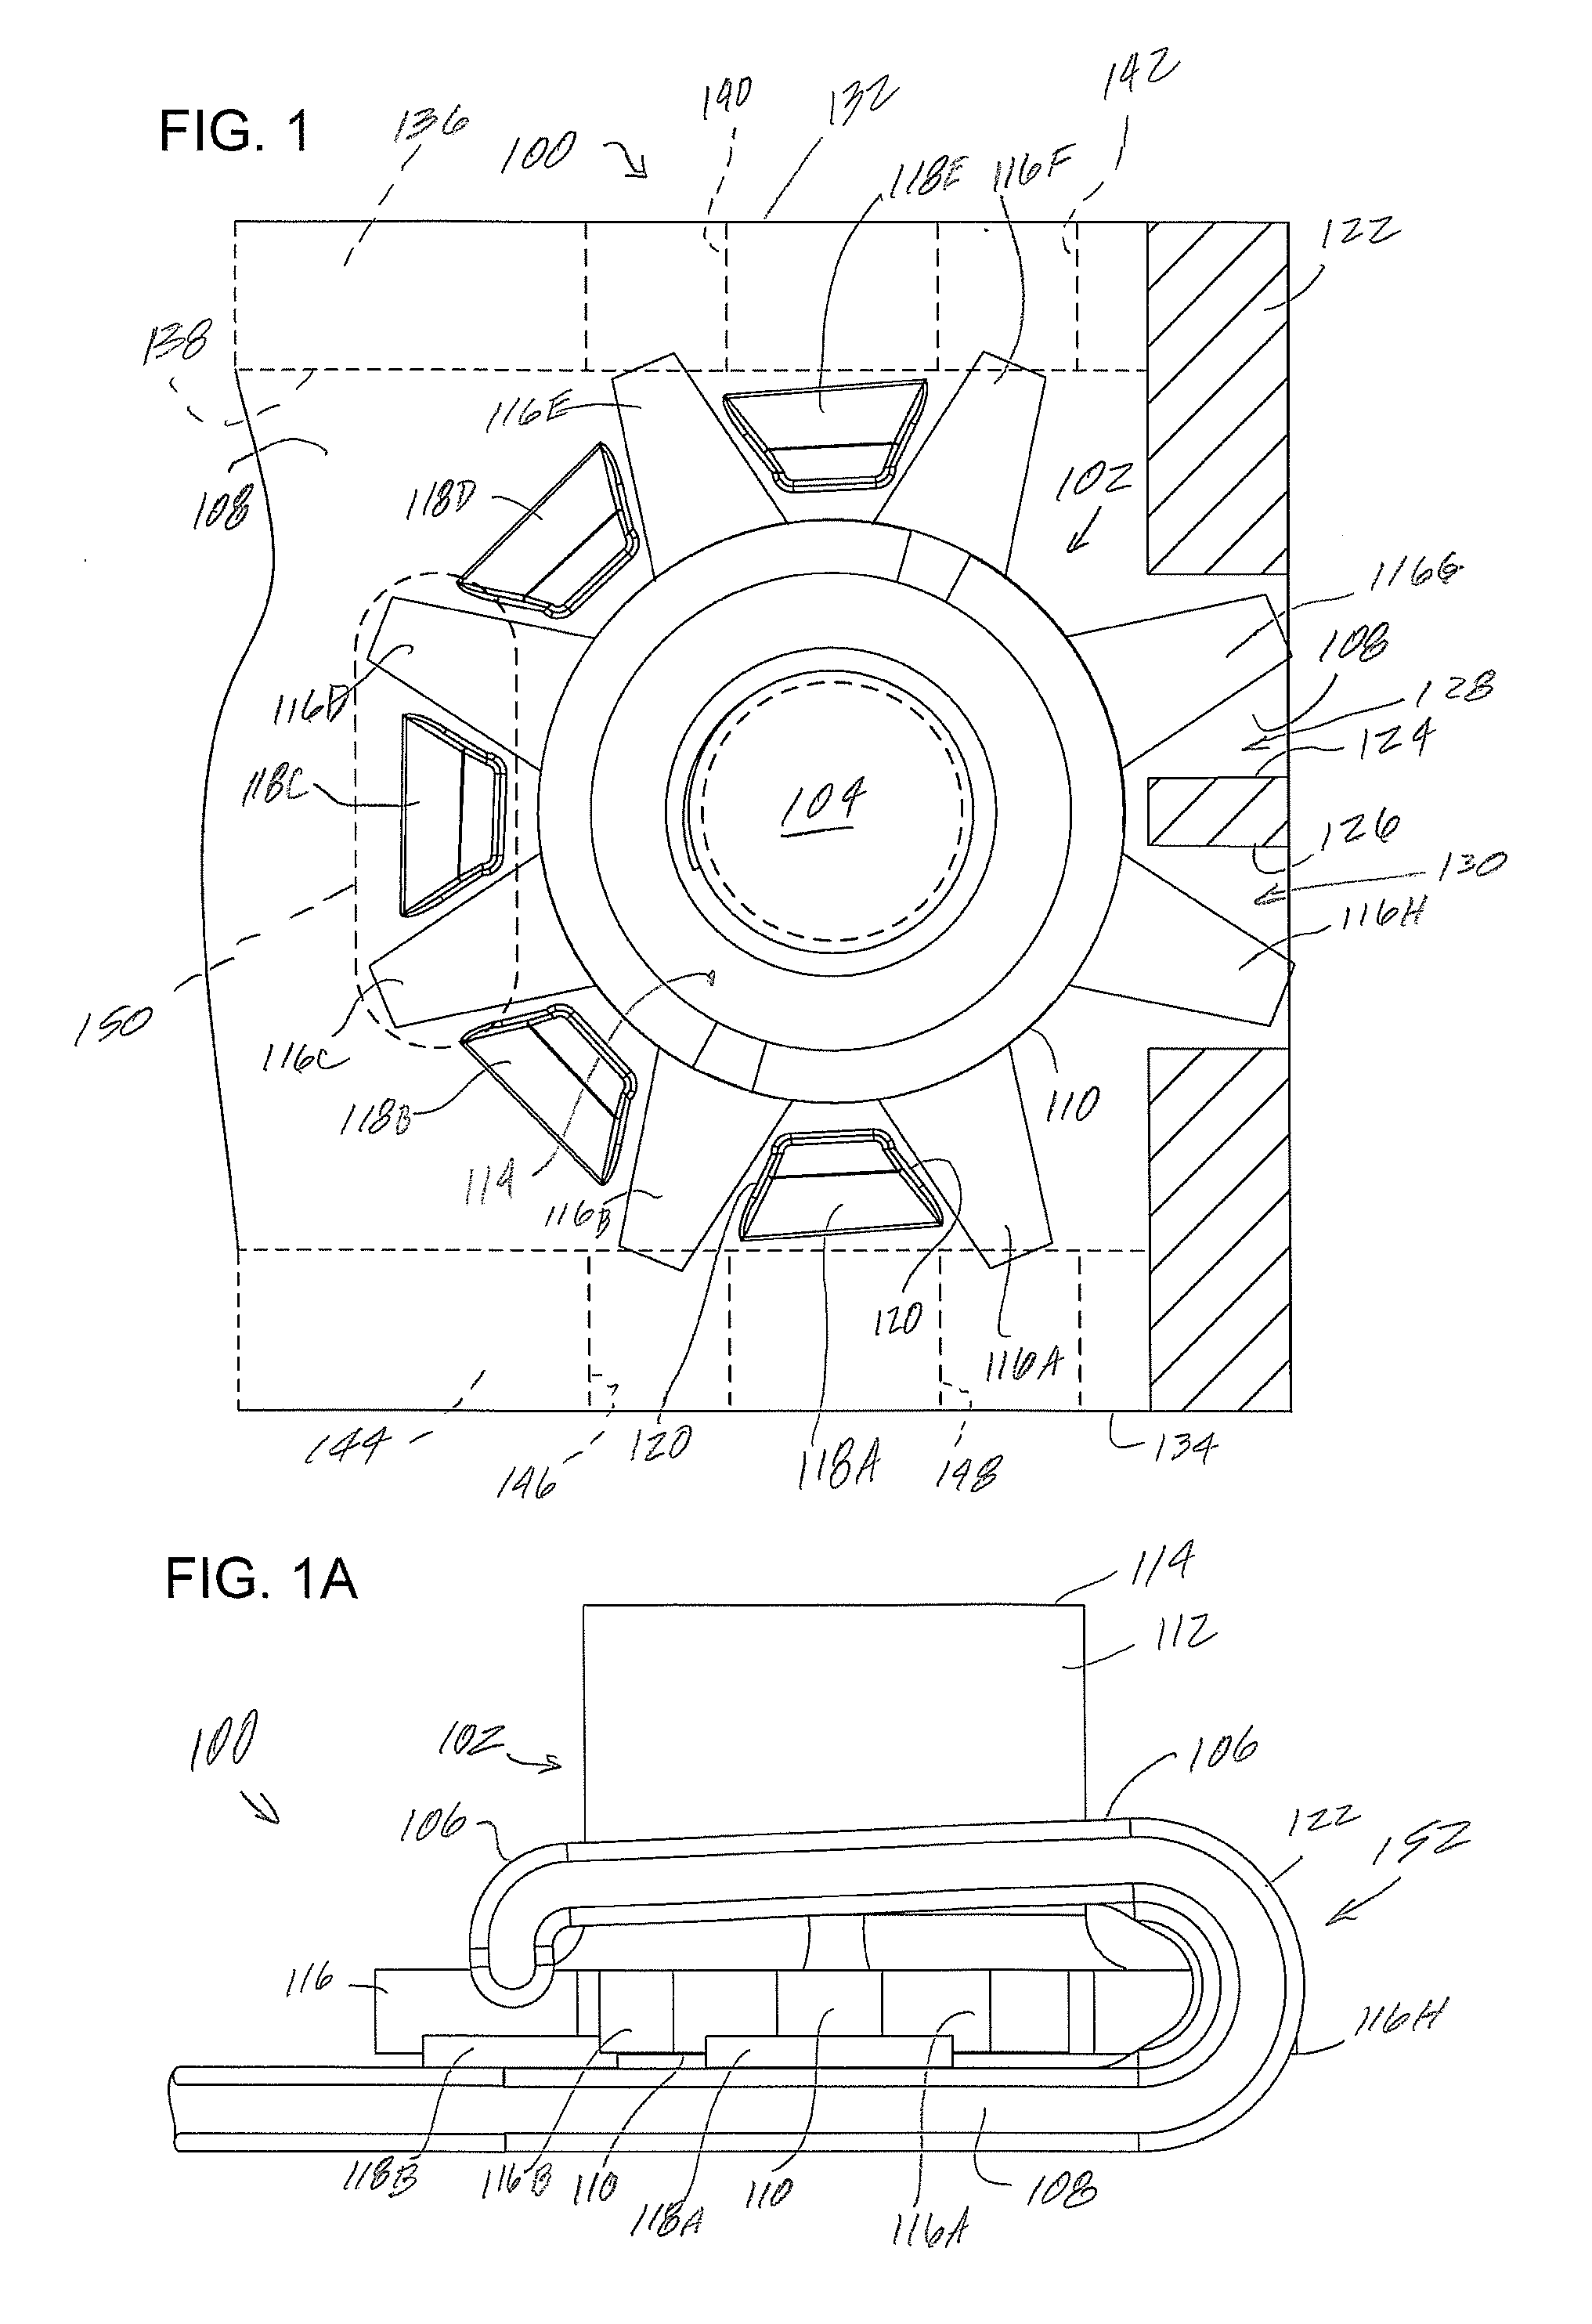 Apparatus and Methods for Fastening a Panel or Other Components